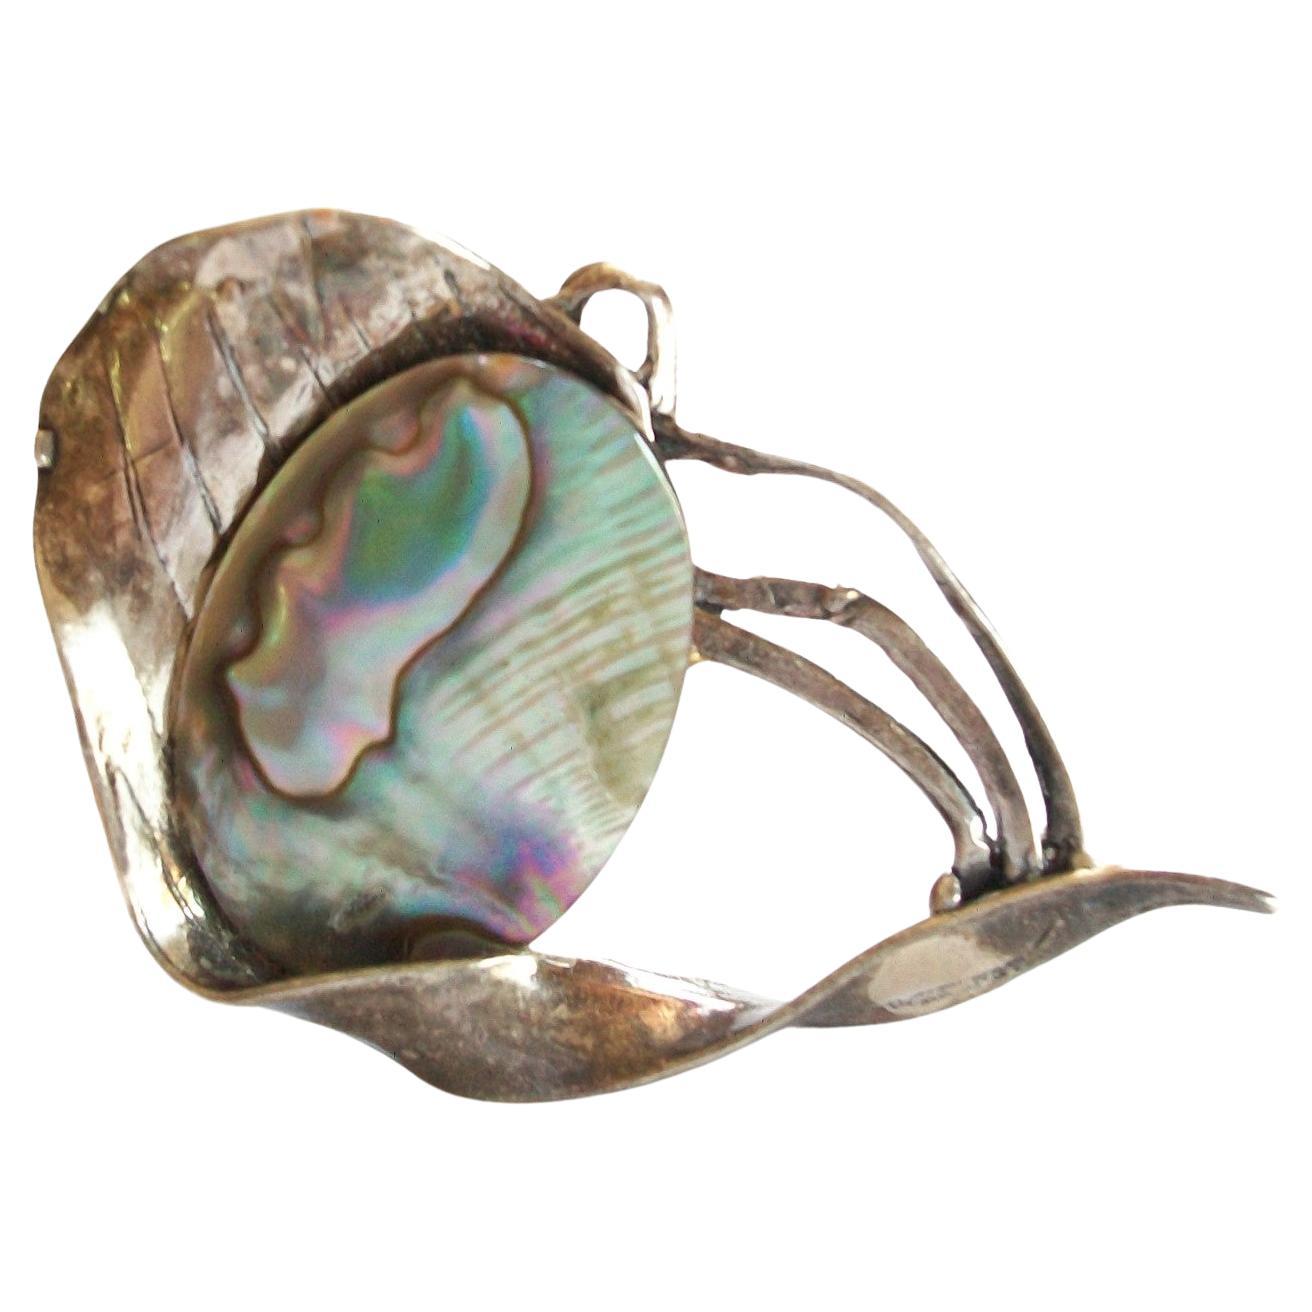 Modernist Artisan Sterling Silver and Abalone Pin/Brooch, Mexico, circa 1970s